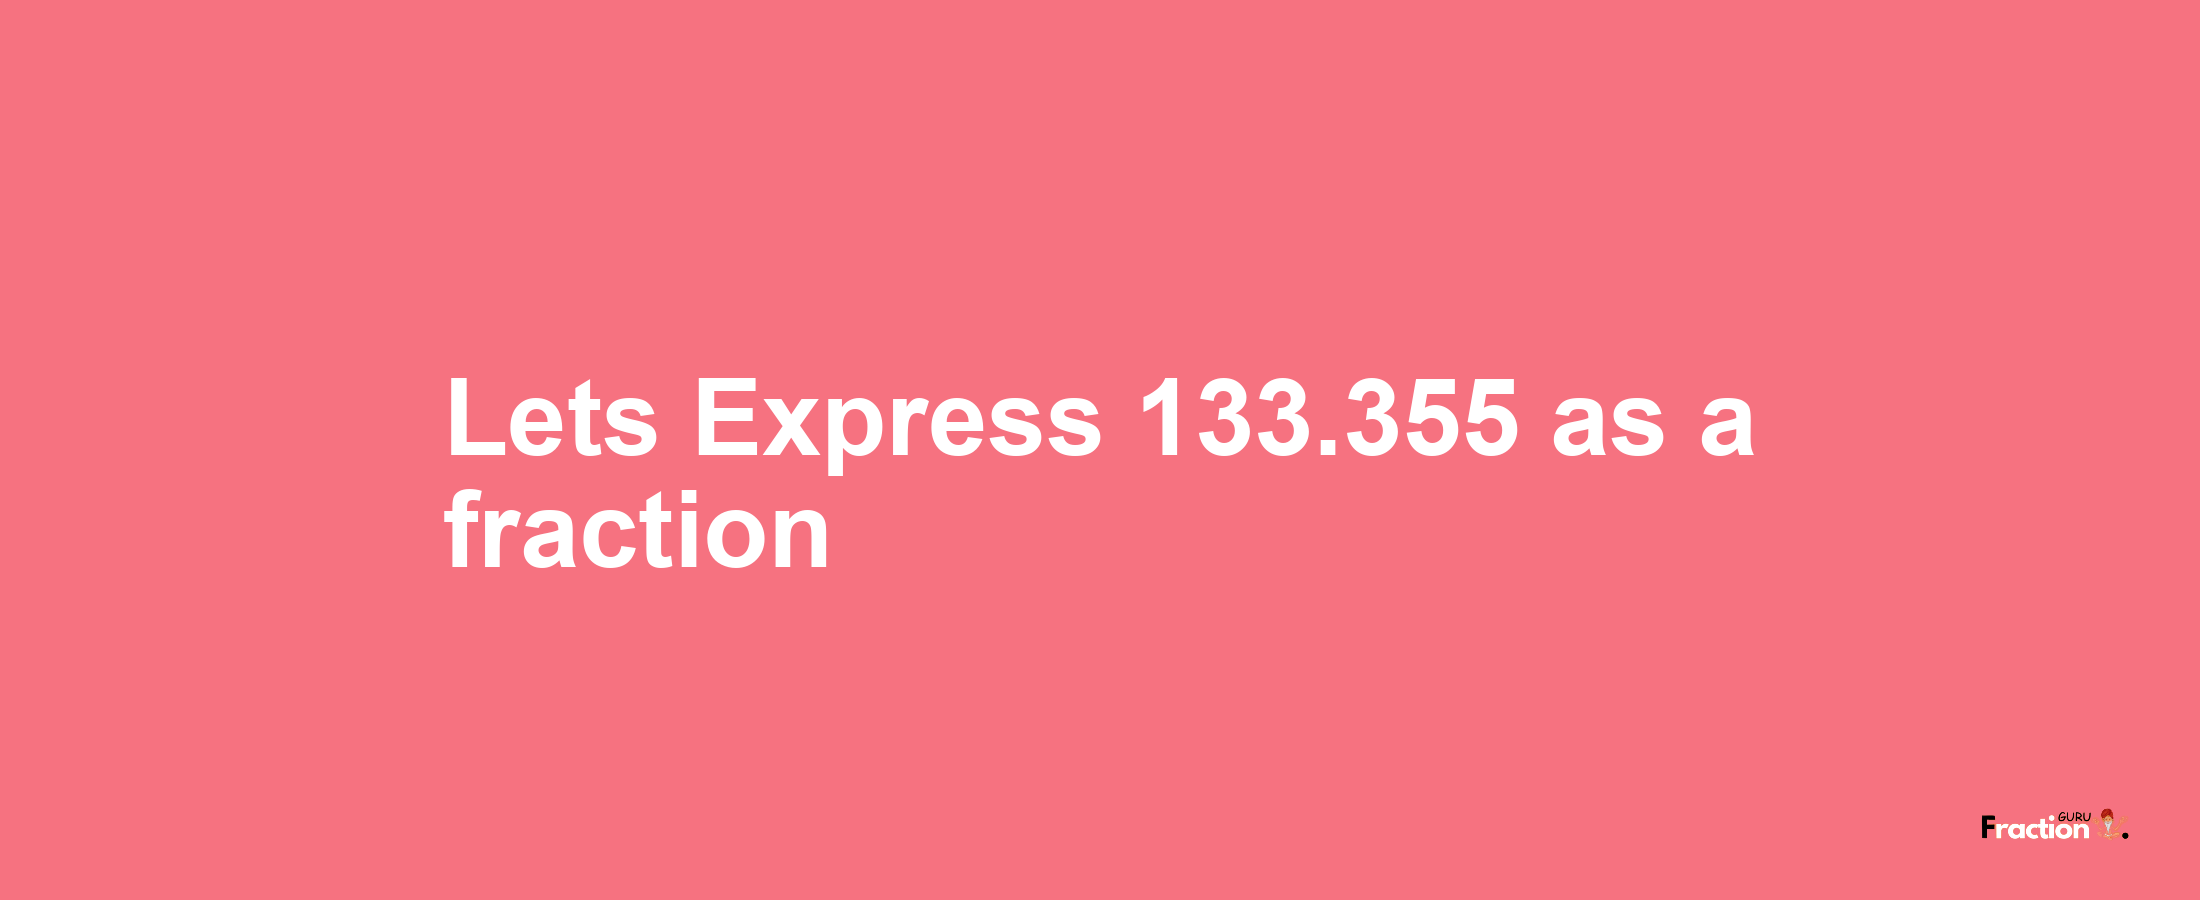 Lets Express 133.355 as afraction